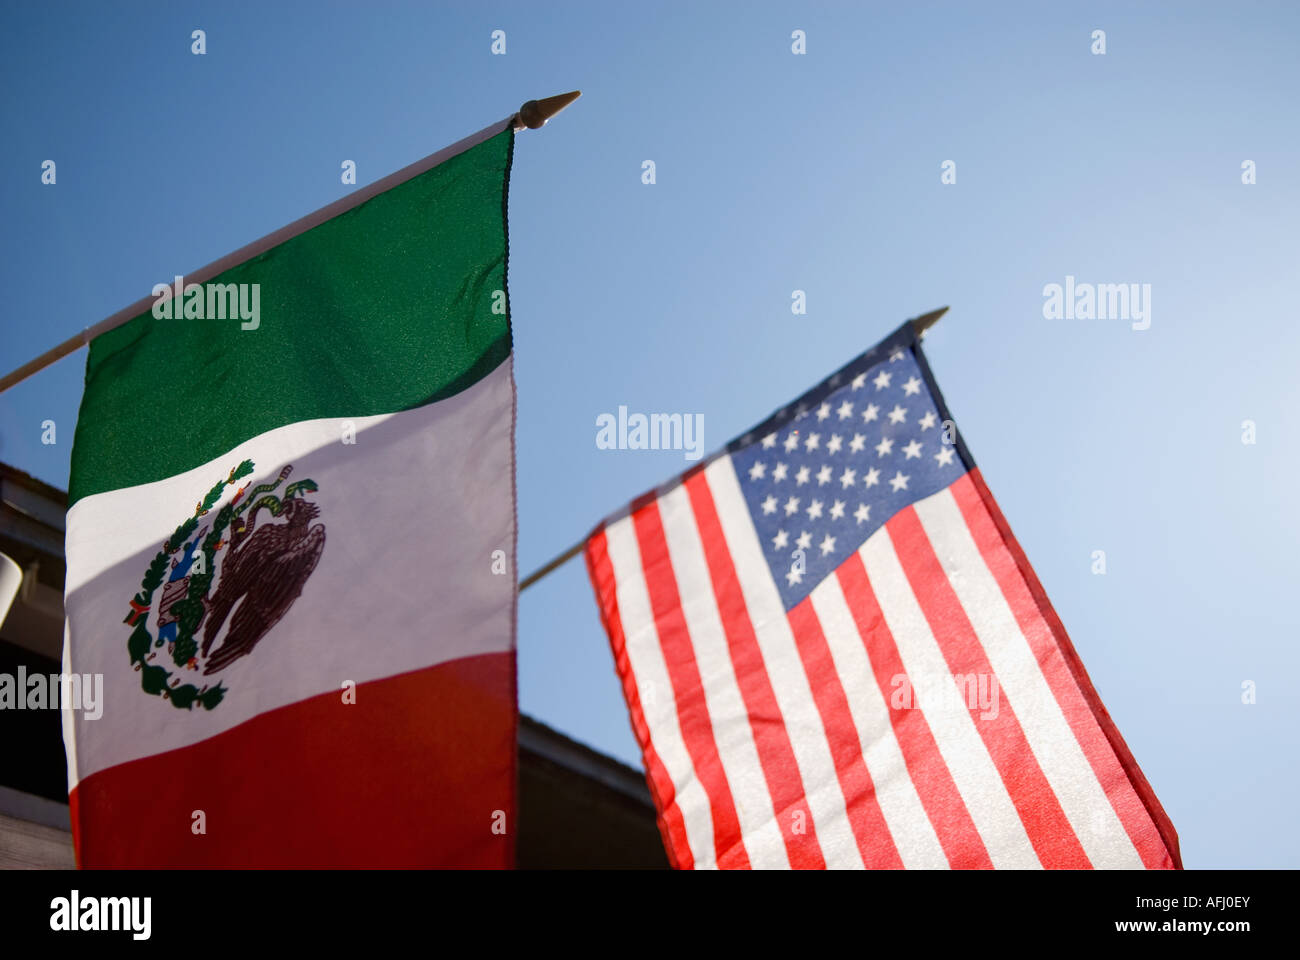 Low angle view of an American flag and a Mexican flag Stock Photo